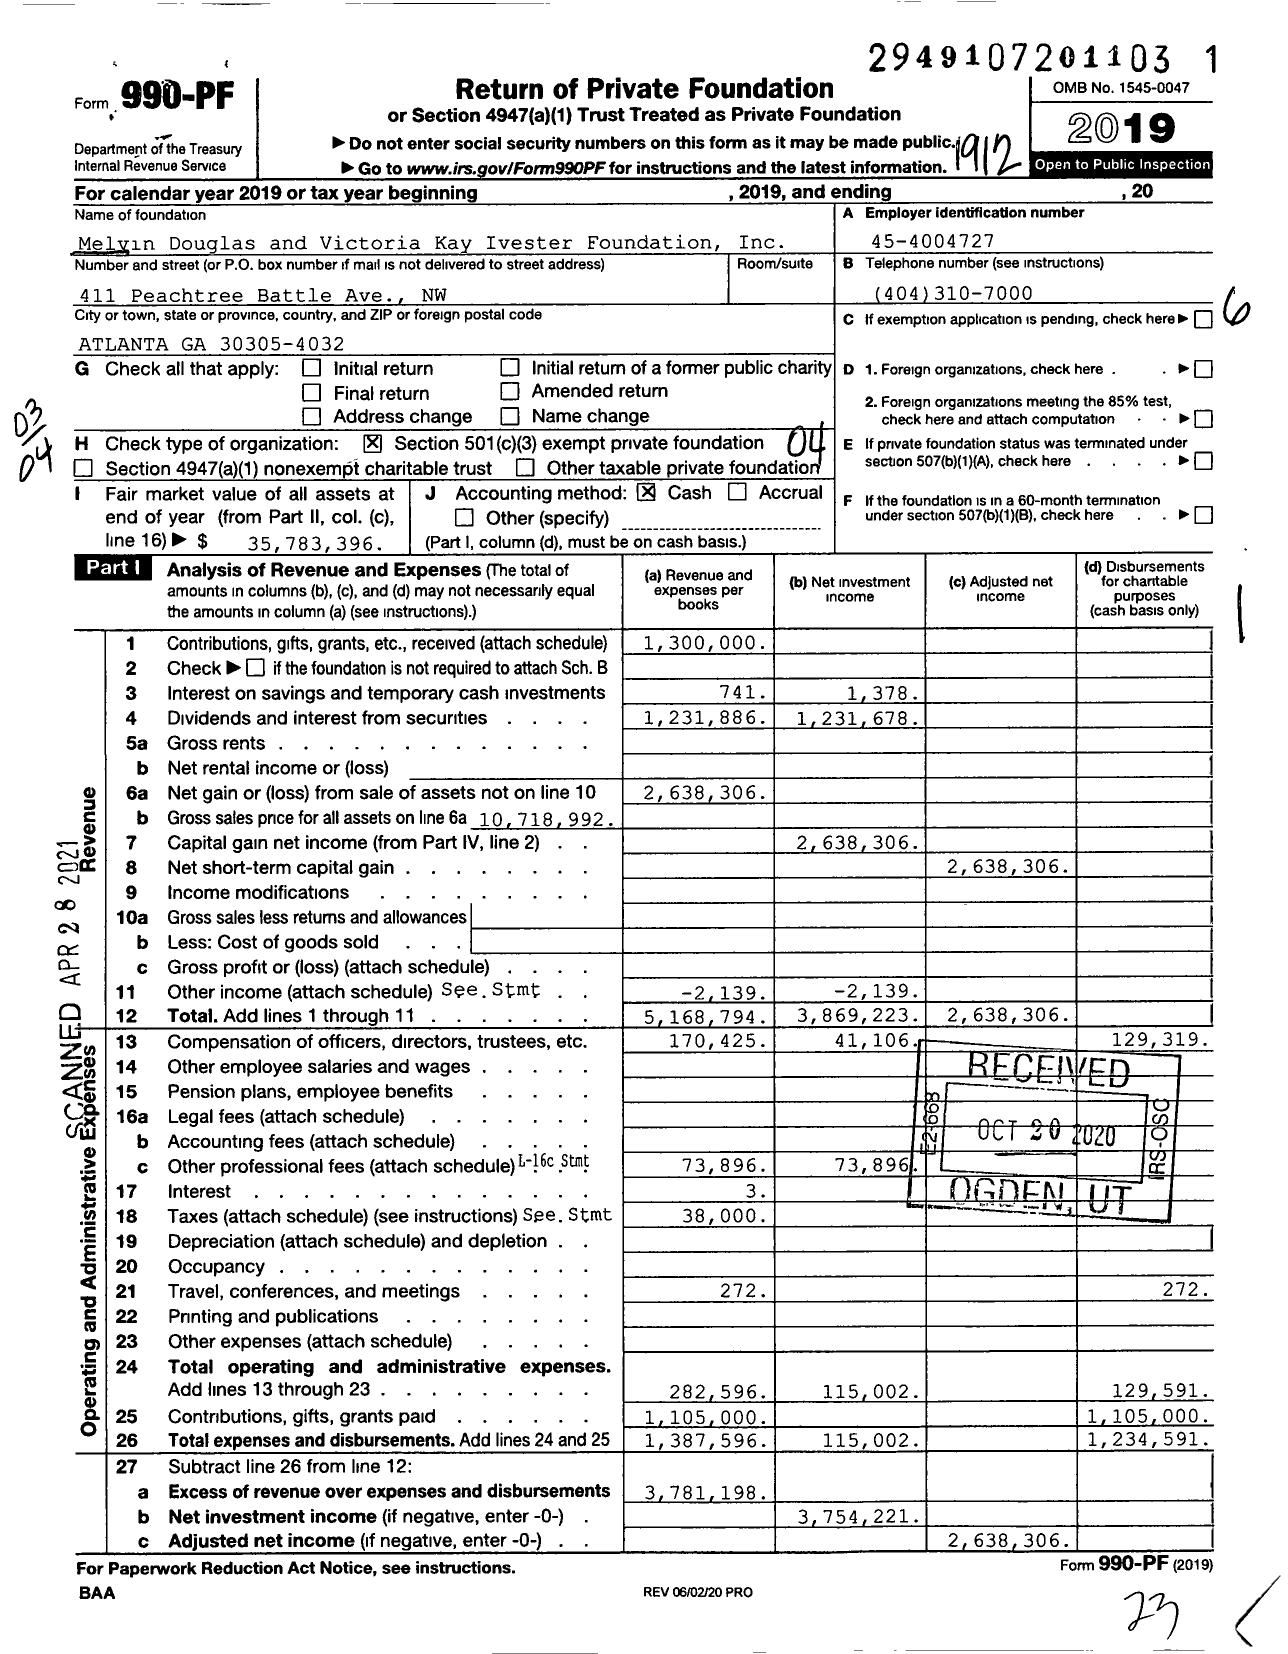 Image of first page of 2019 Form 990PF for Melvin Douglas and Victoria Kay Ivester Foundation